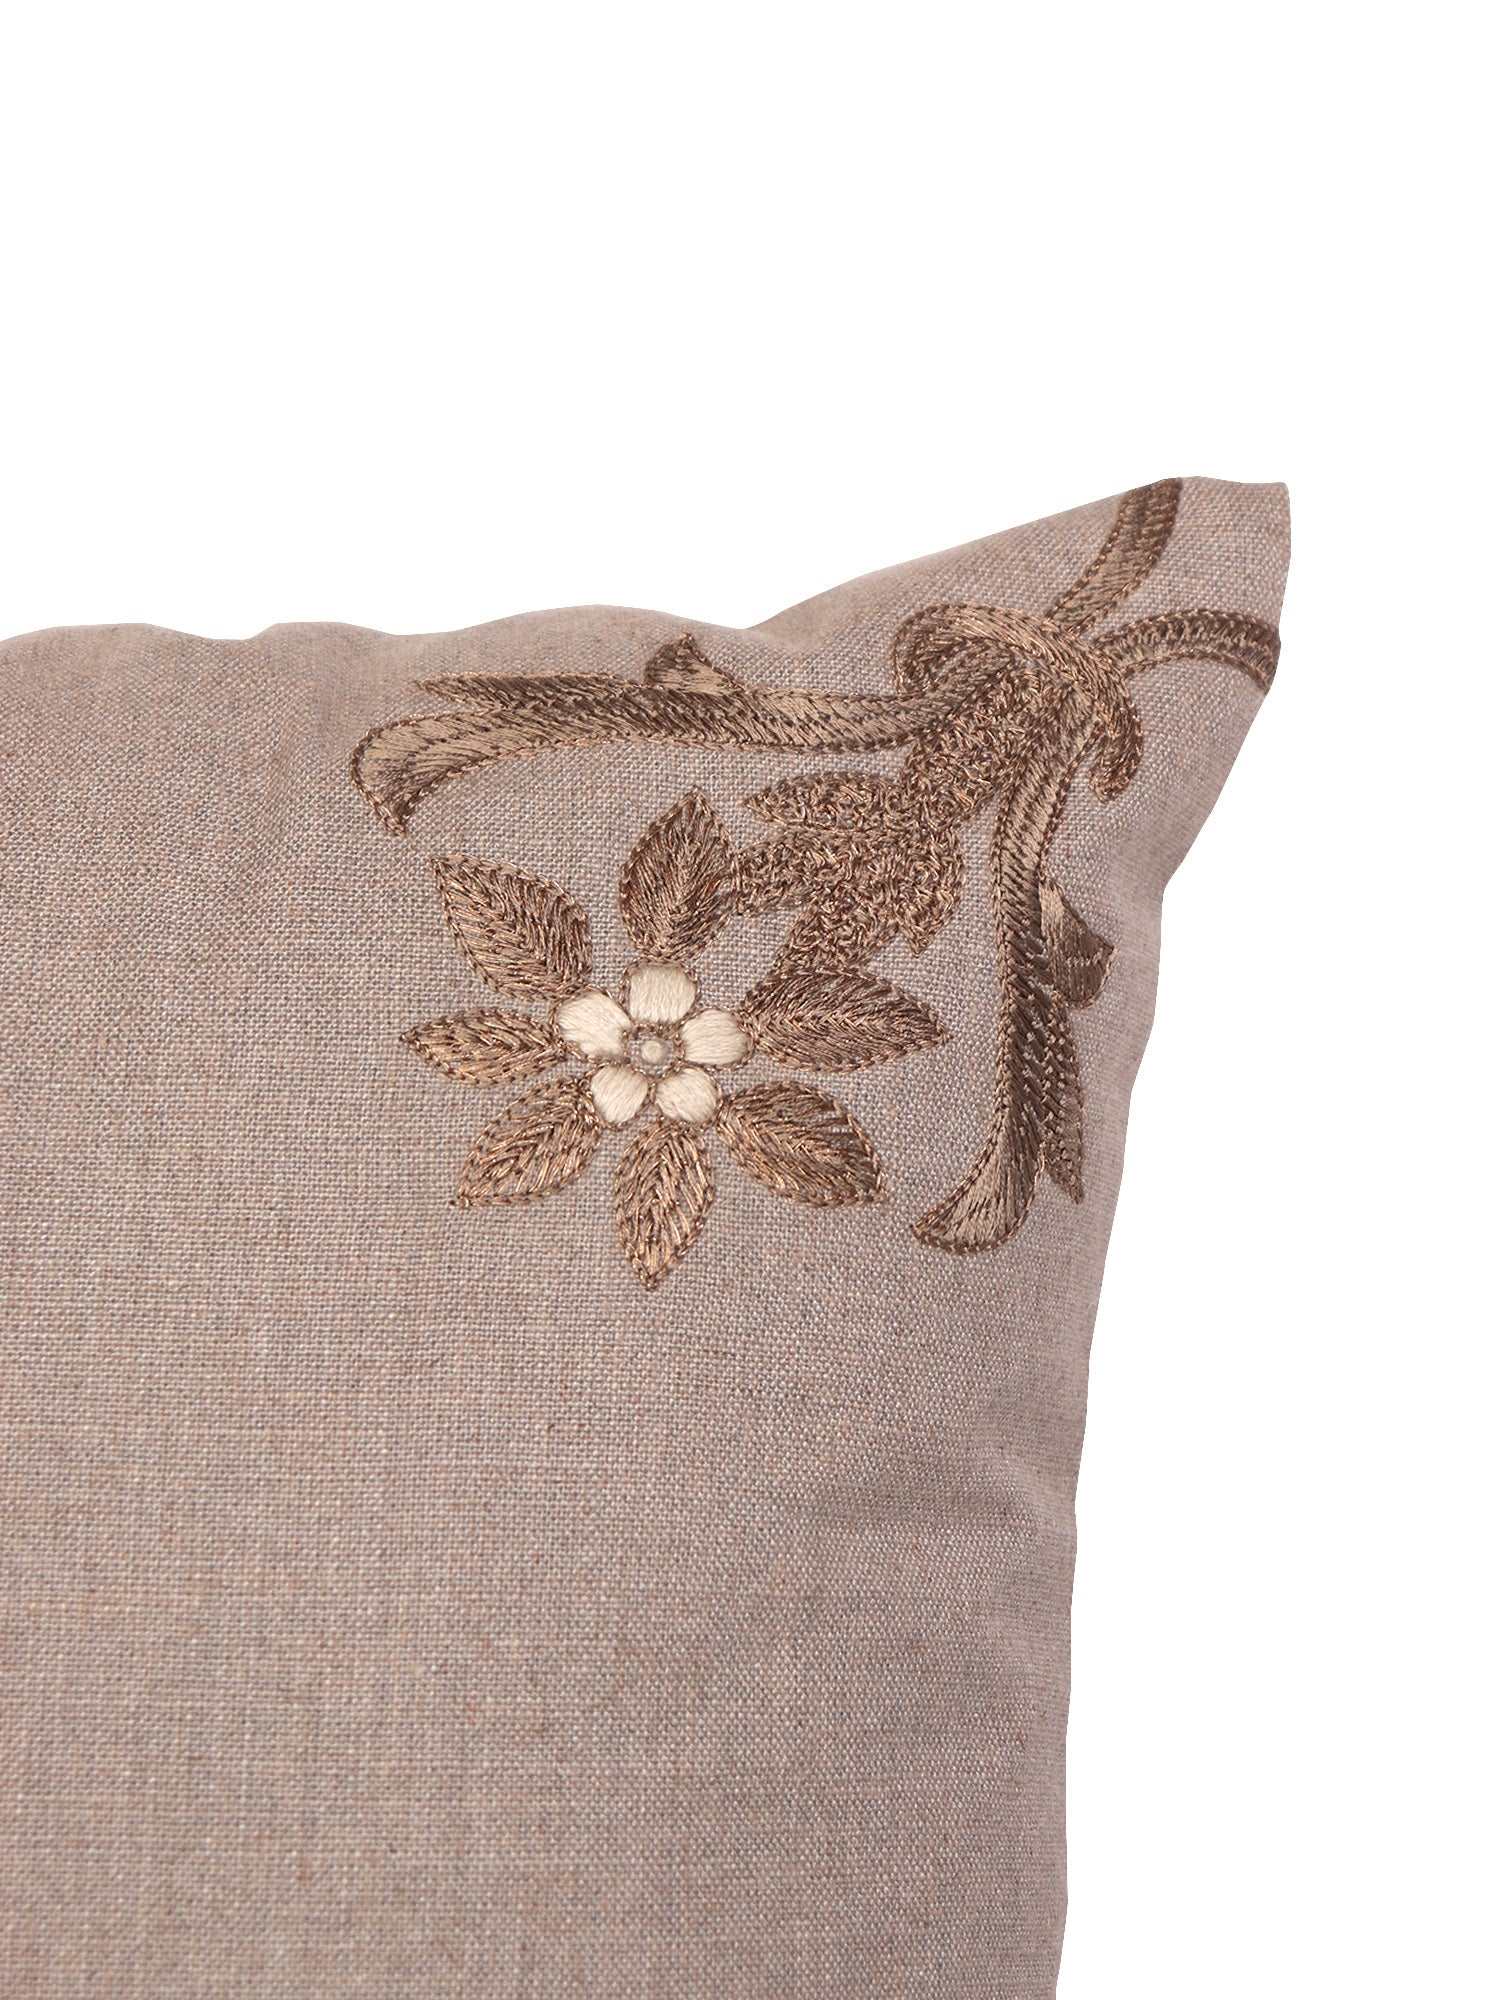 Cushion Cover Cotton Floral Hand Embroidery Beige - 16inches X 16inches